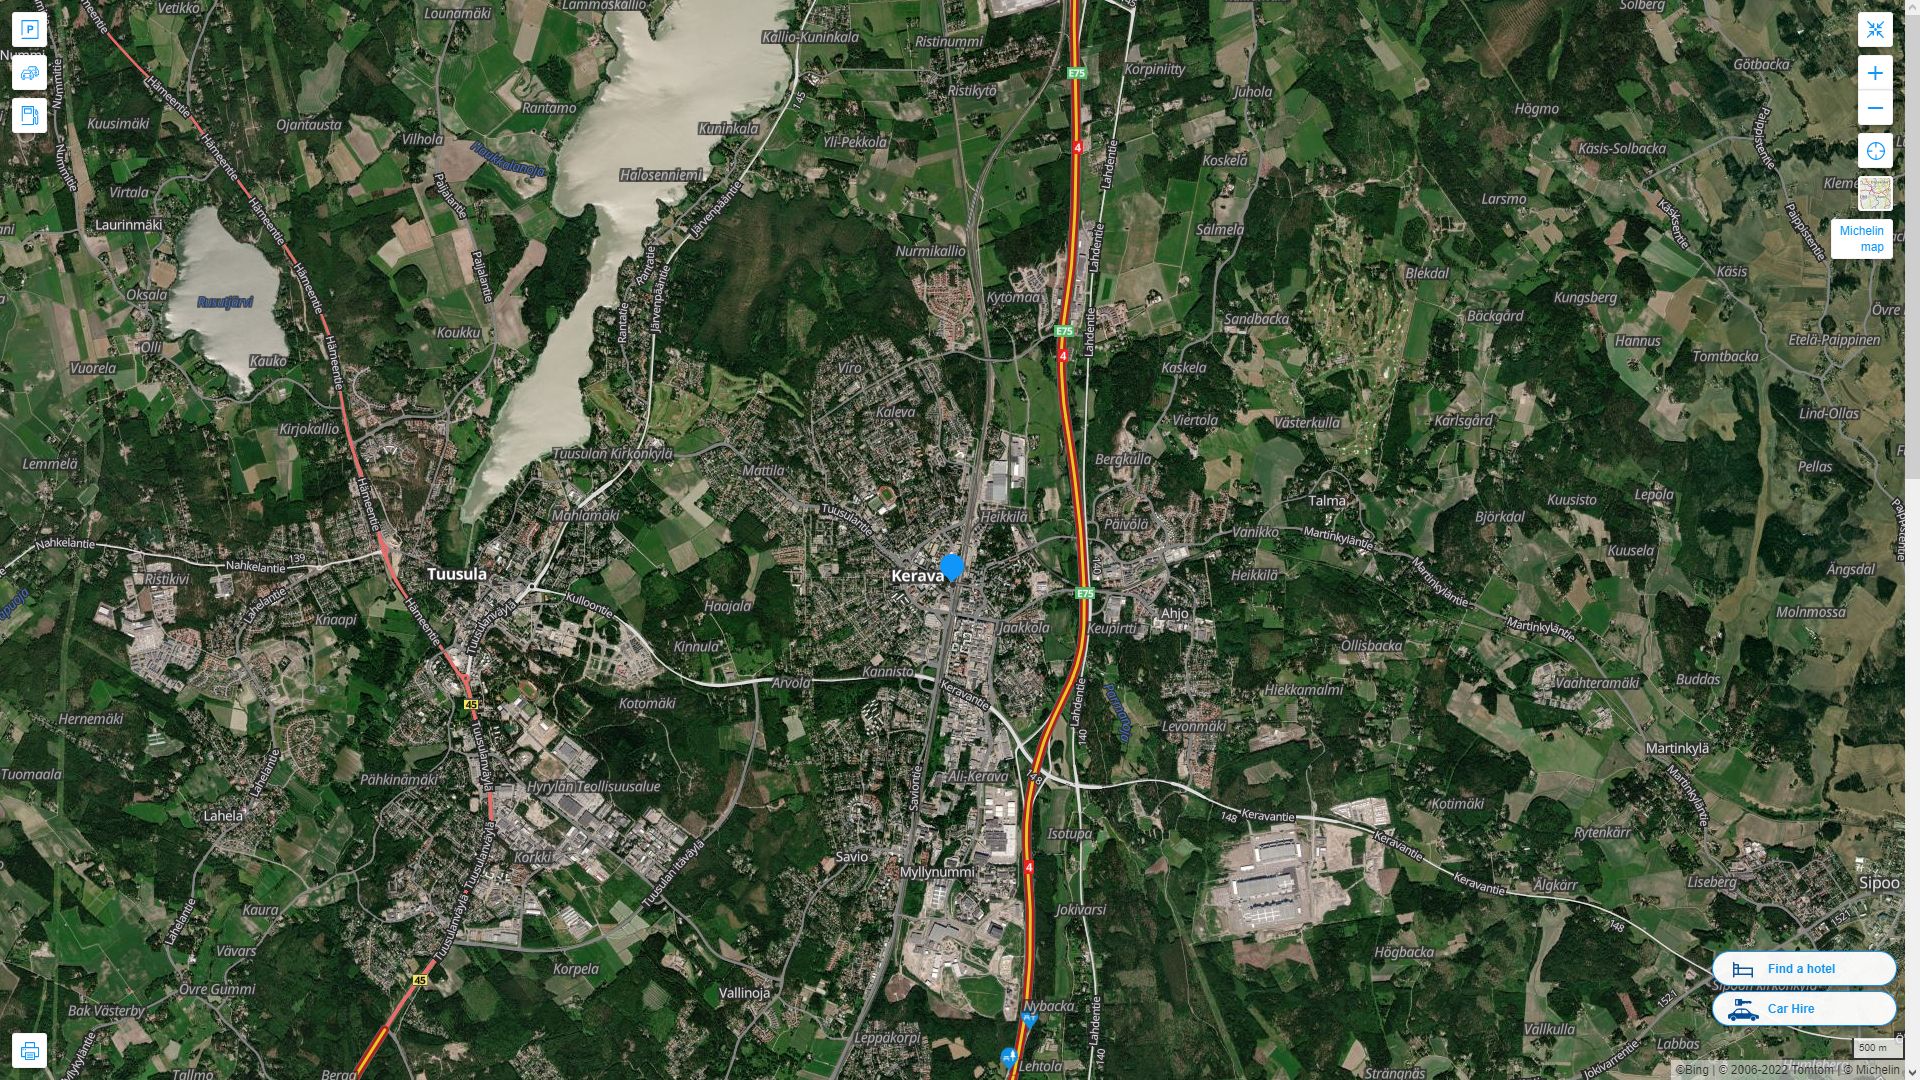 Kerava Highway and Road Map with Satellite View